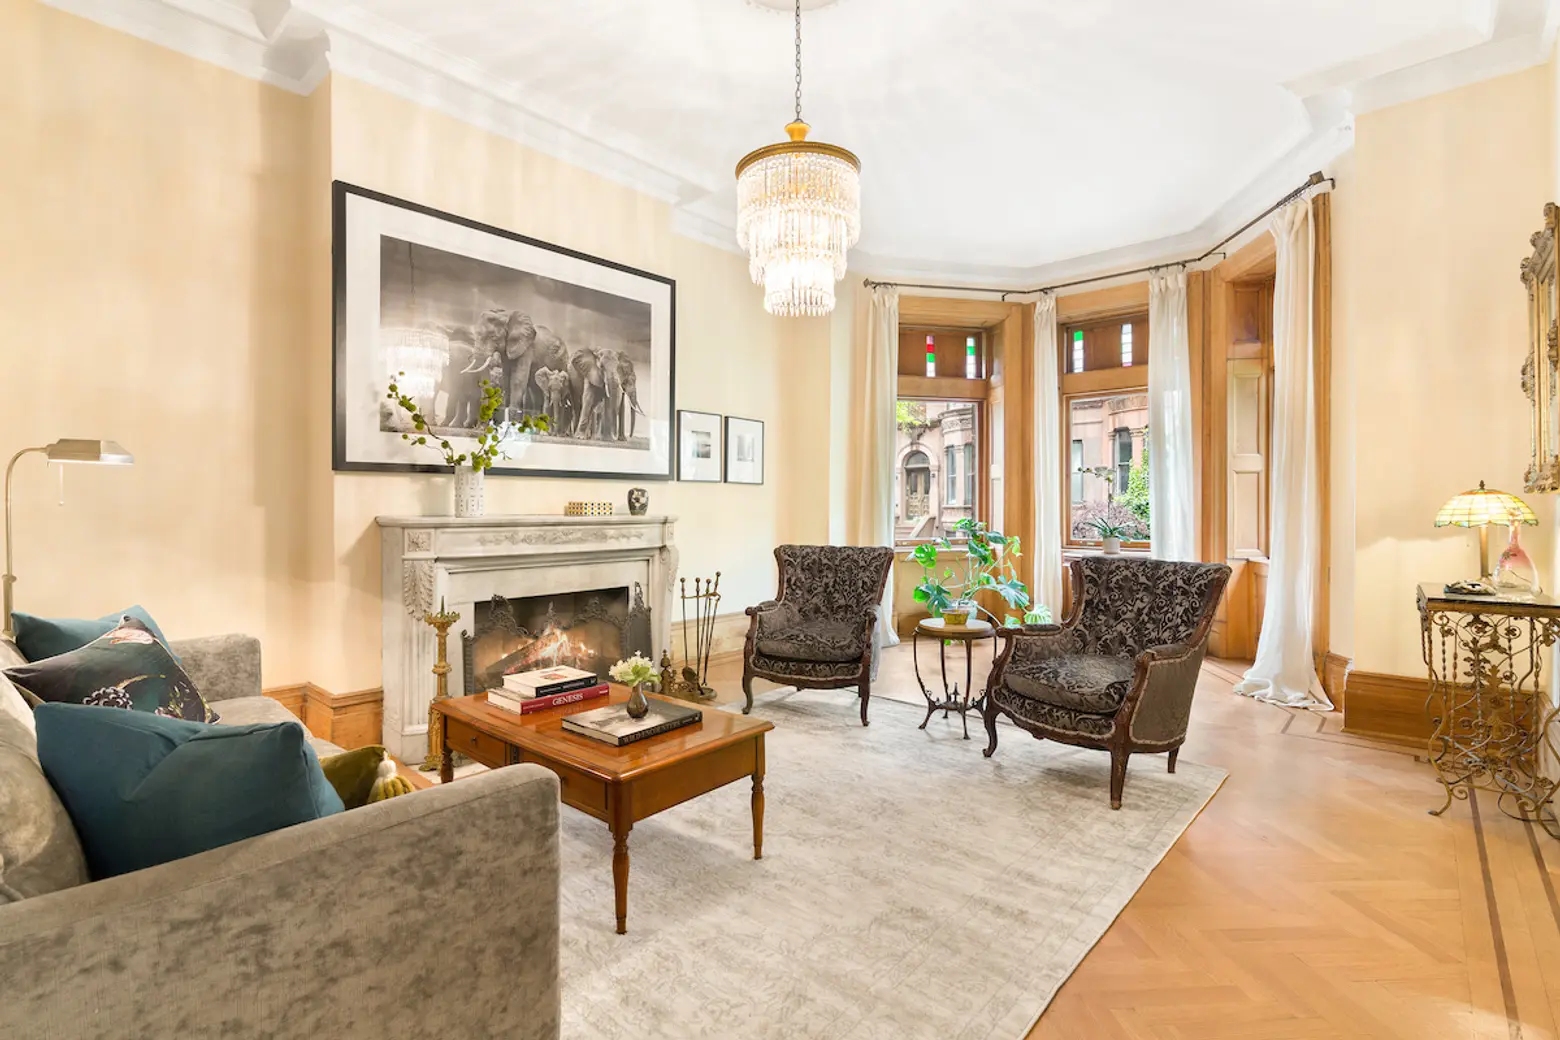 This $6M Park Slope mansion is as stunning inside as it is outside, from finished basement to green roof